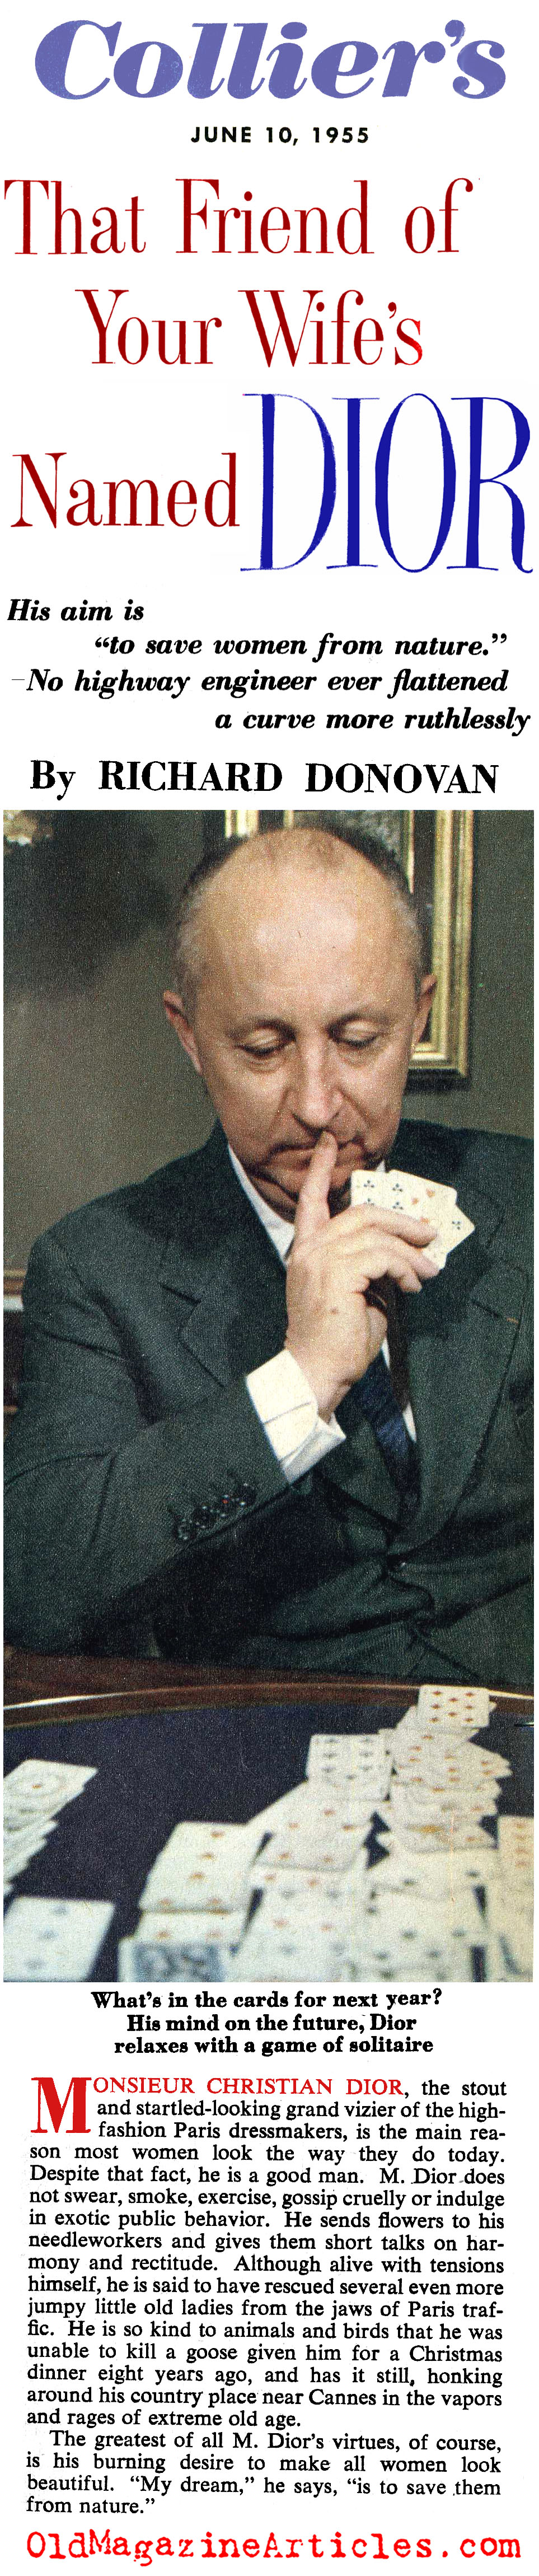 The Man Behind the Look (Collier's Magazine, 1955)